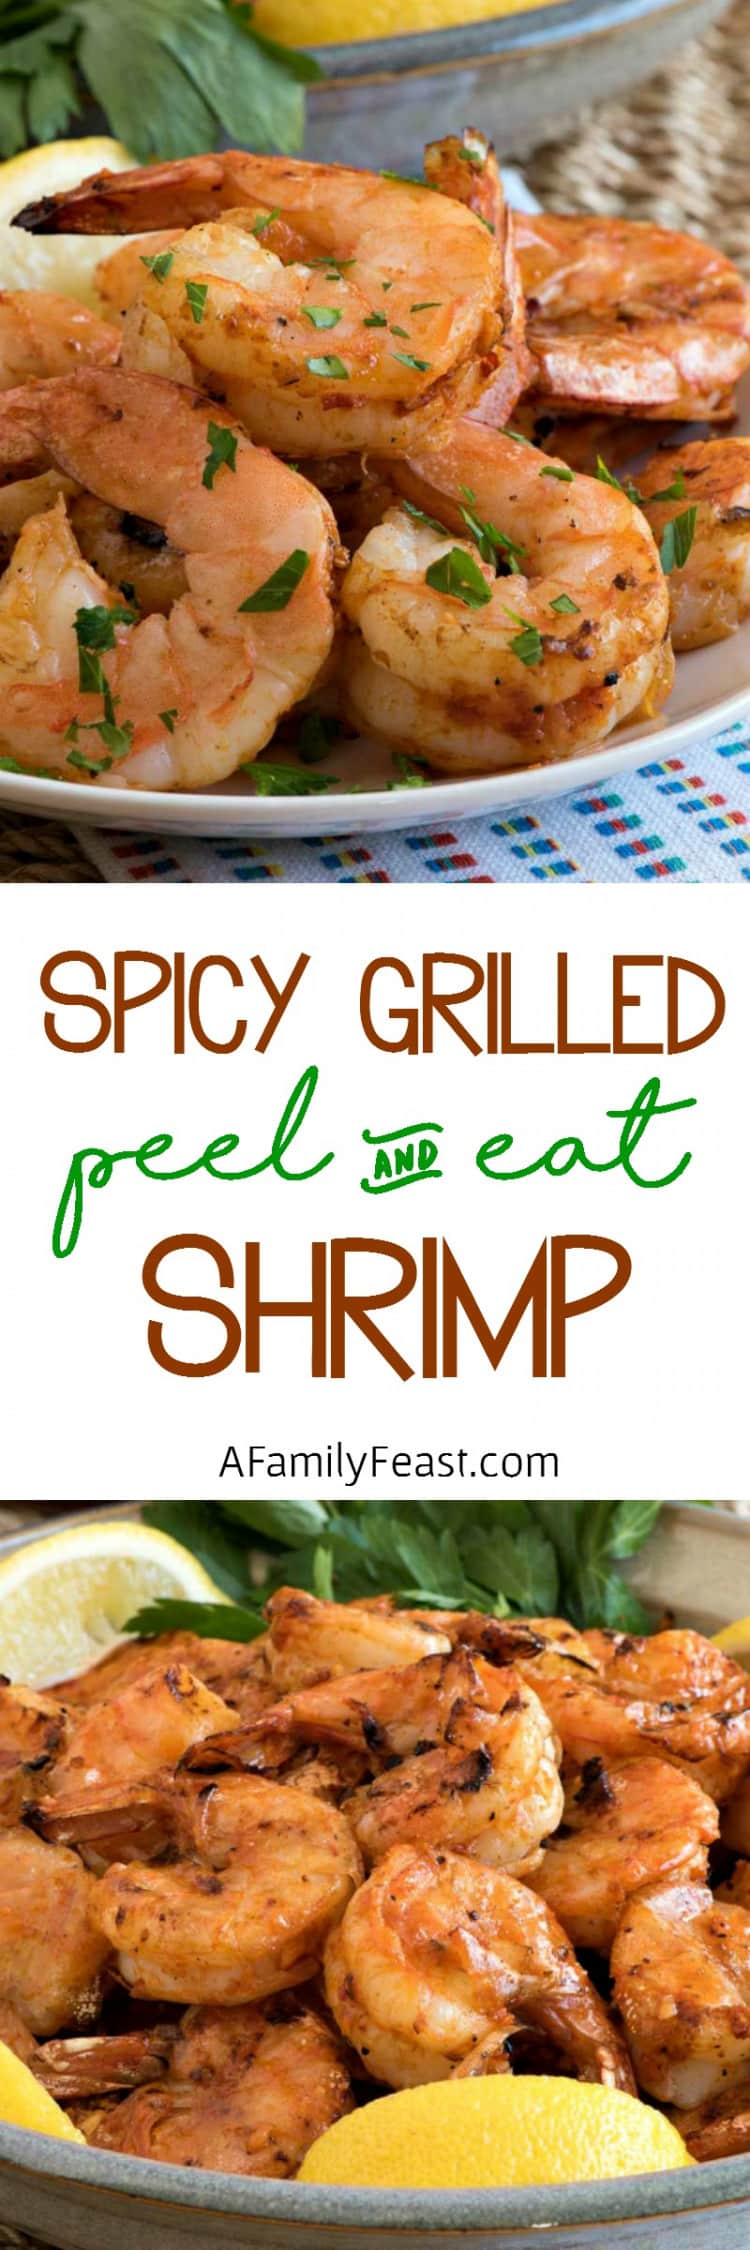 Spicy Grilled Peel and Eat Shrimp - A Family Feast®